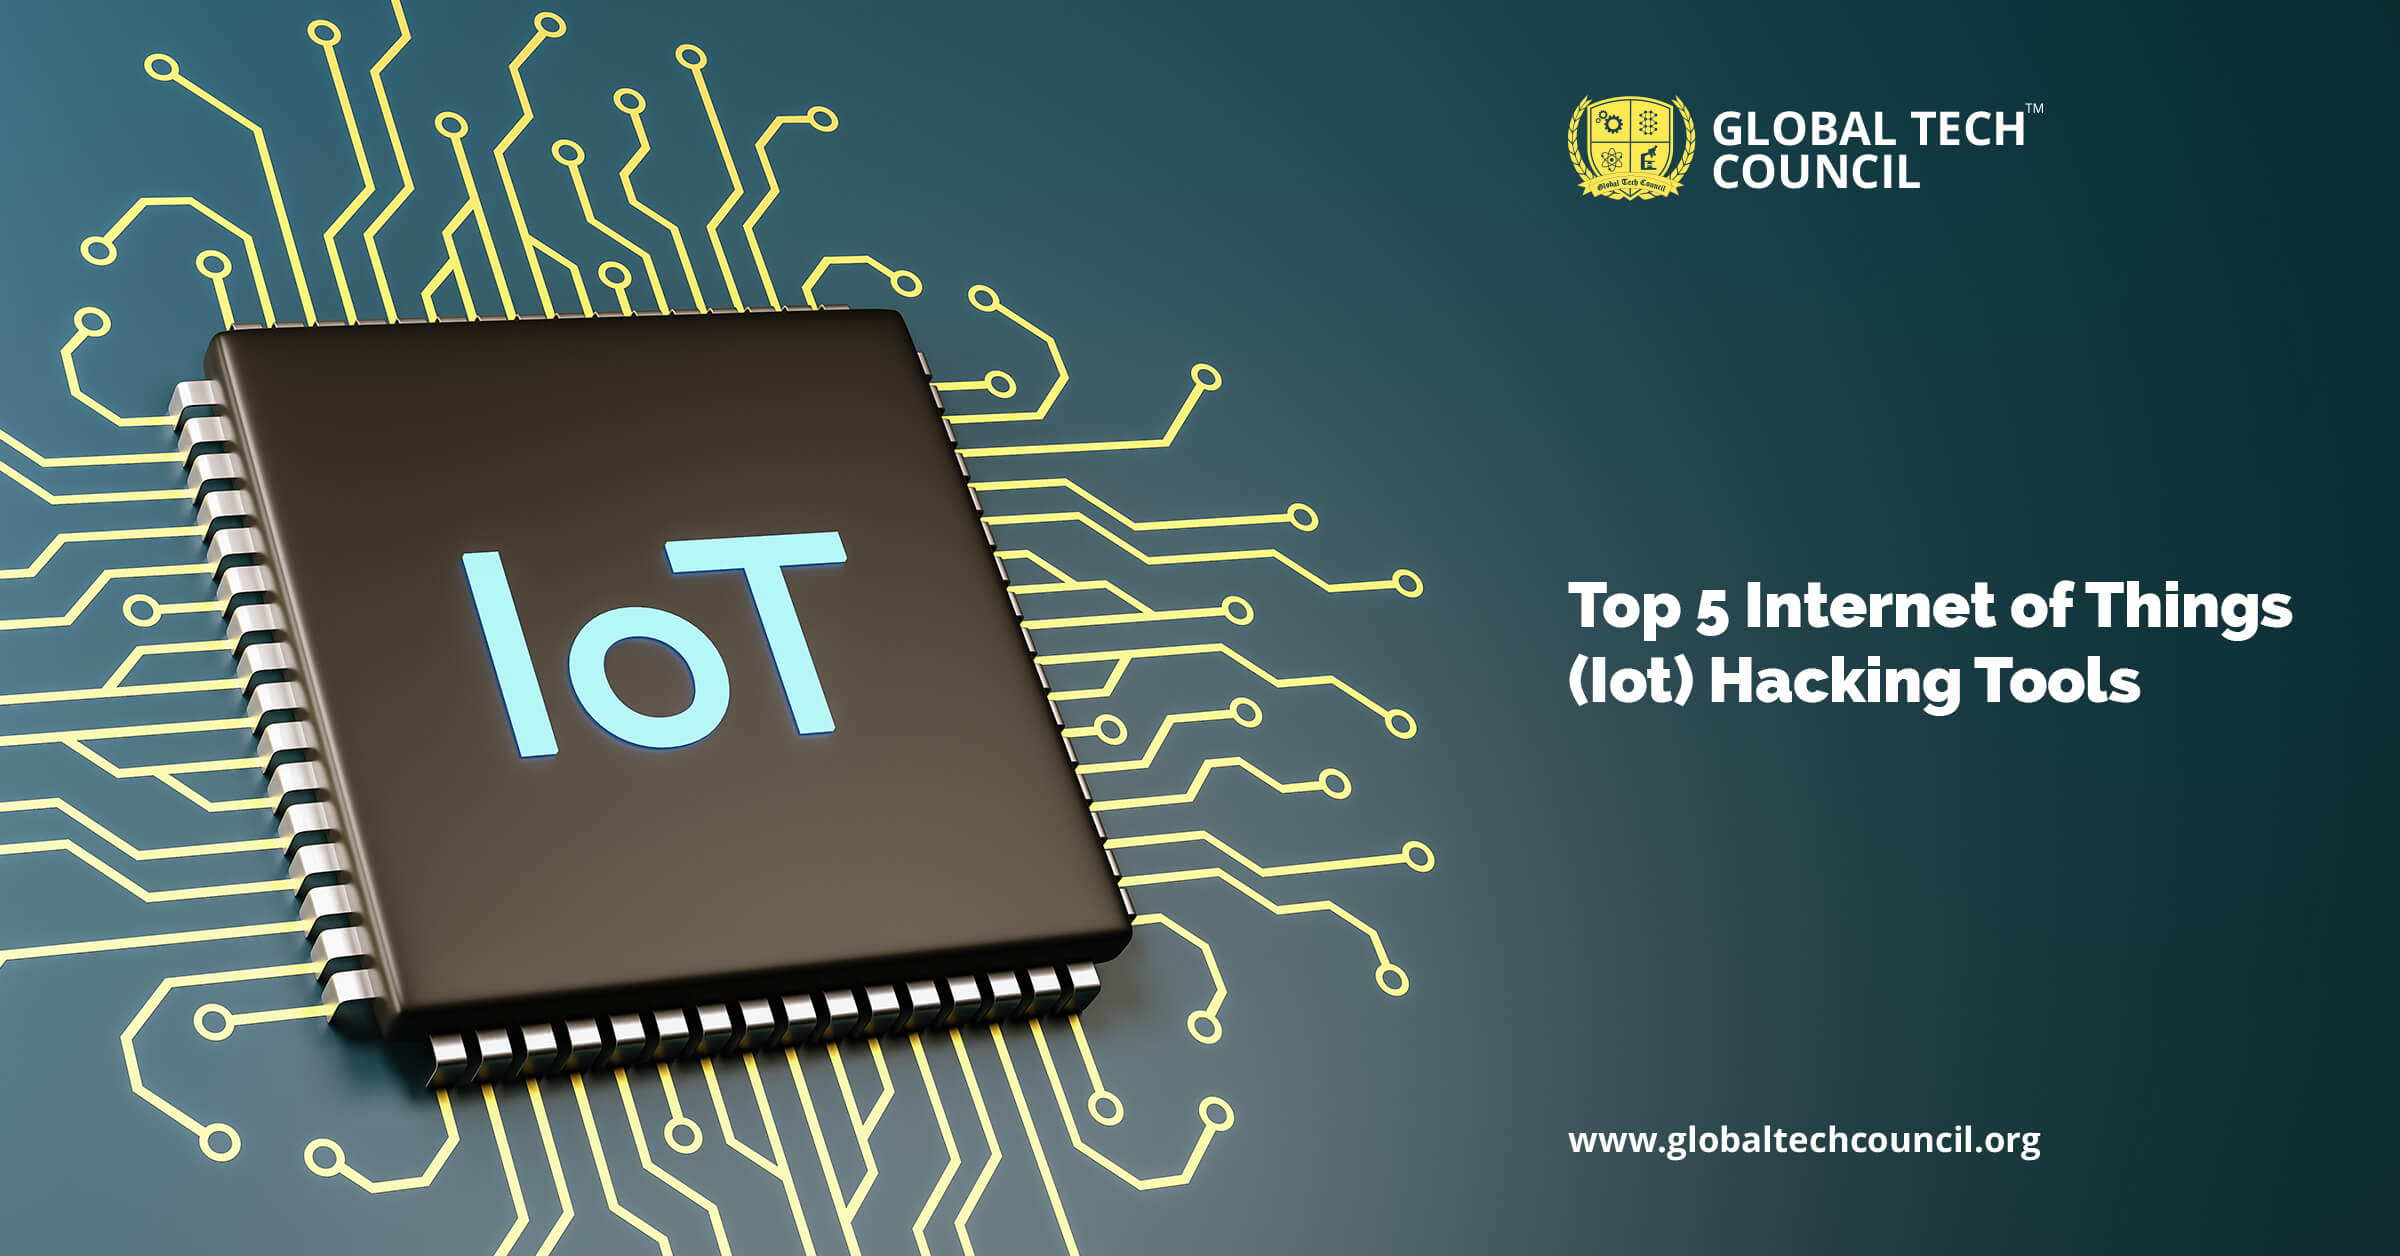 Top 5 Internet of Things (Iot) Hacking Tools